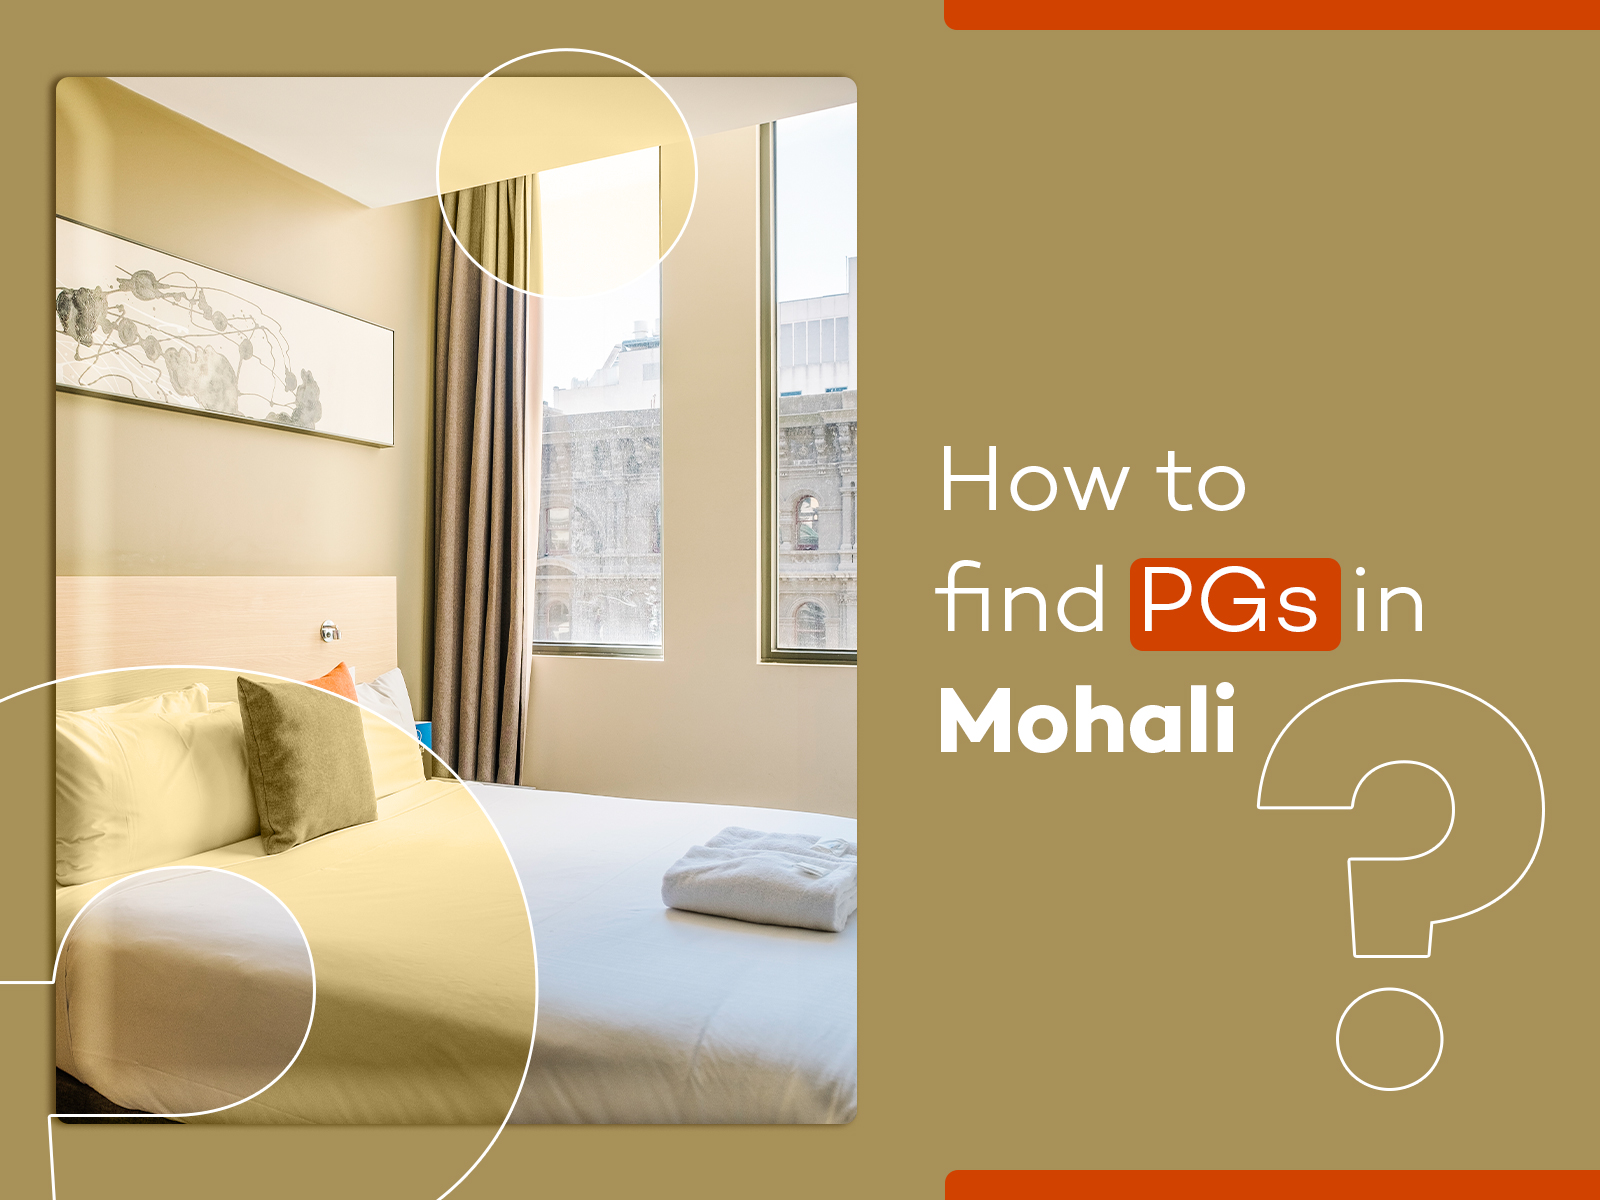 Pgs in Mohali